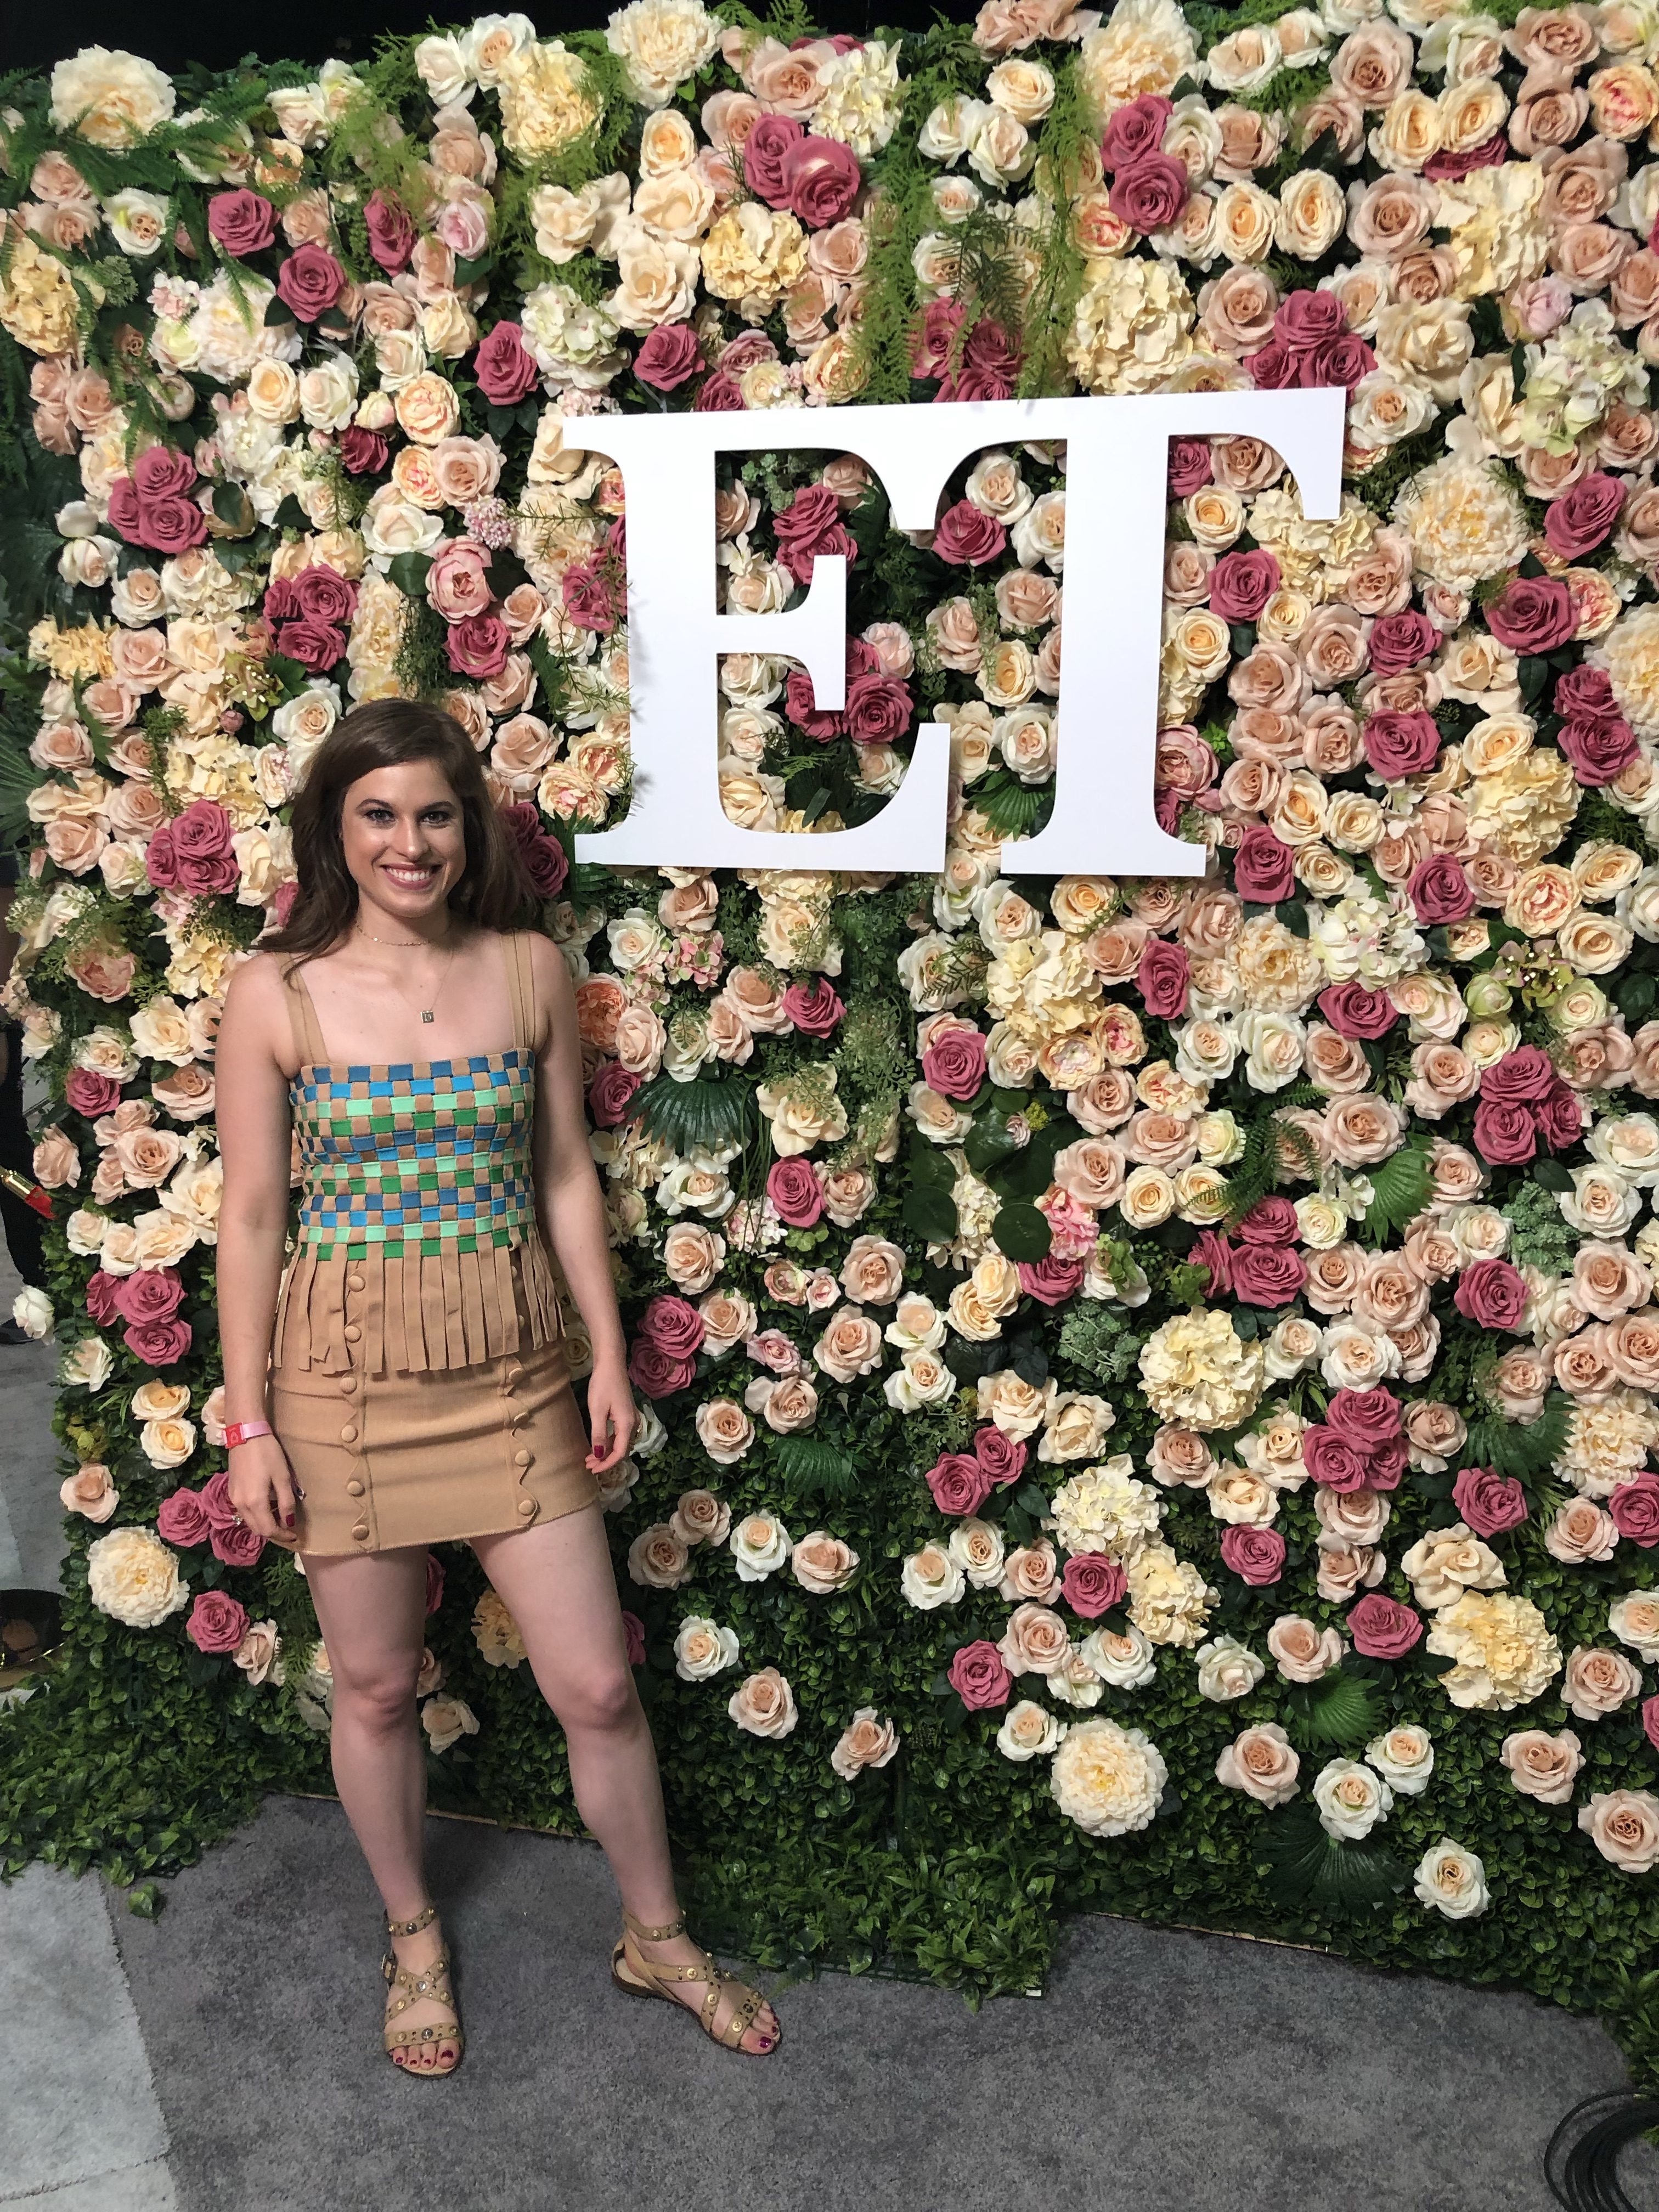 Woman standing in front of a flower backdrop wearing a printed spaghetti strap top and a beige mini skirt and sandals. She has brown curly hair